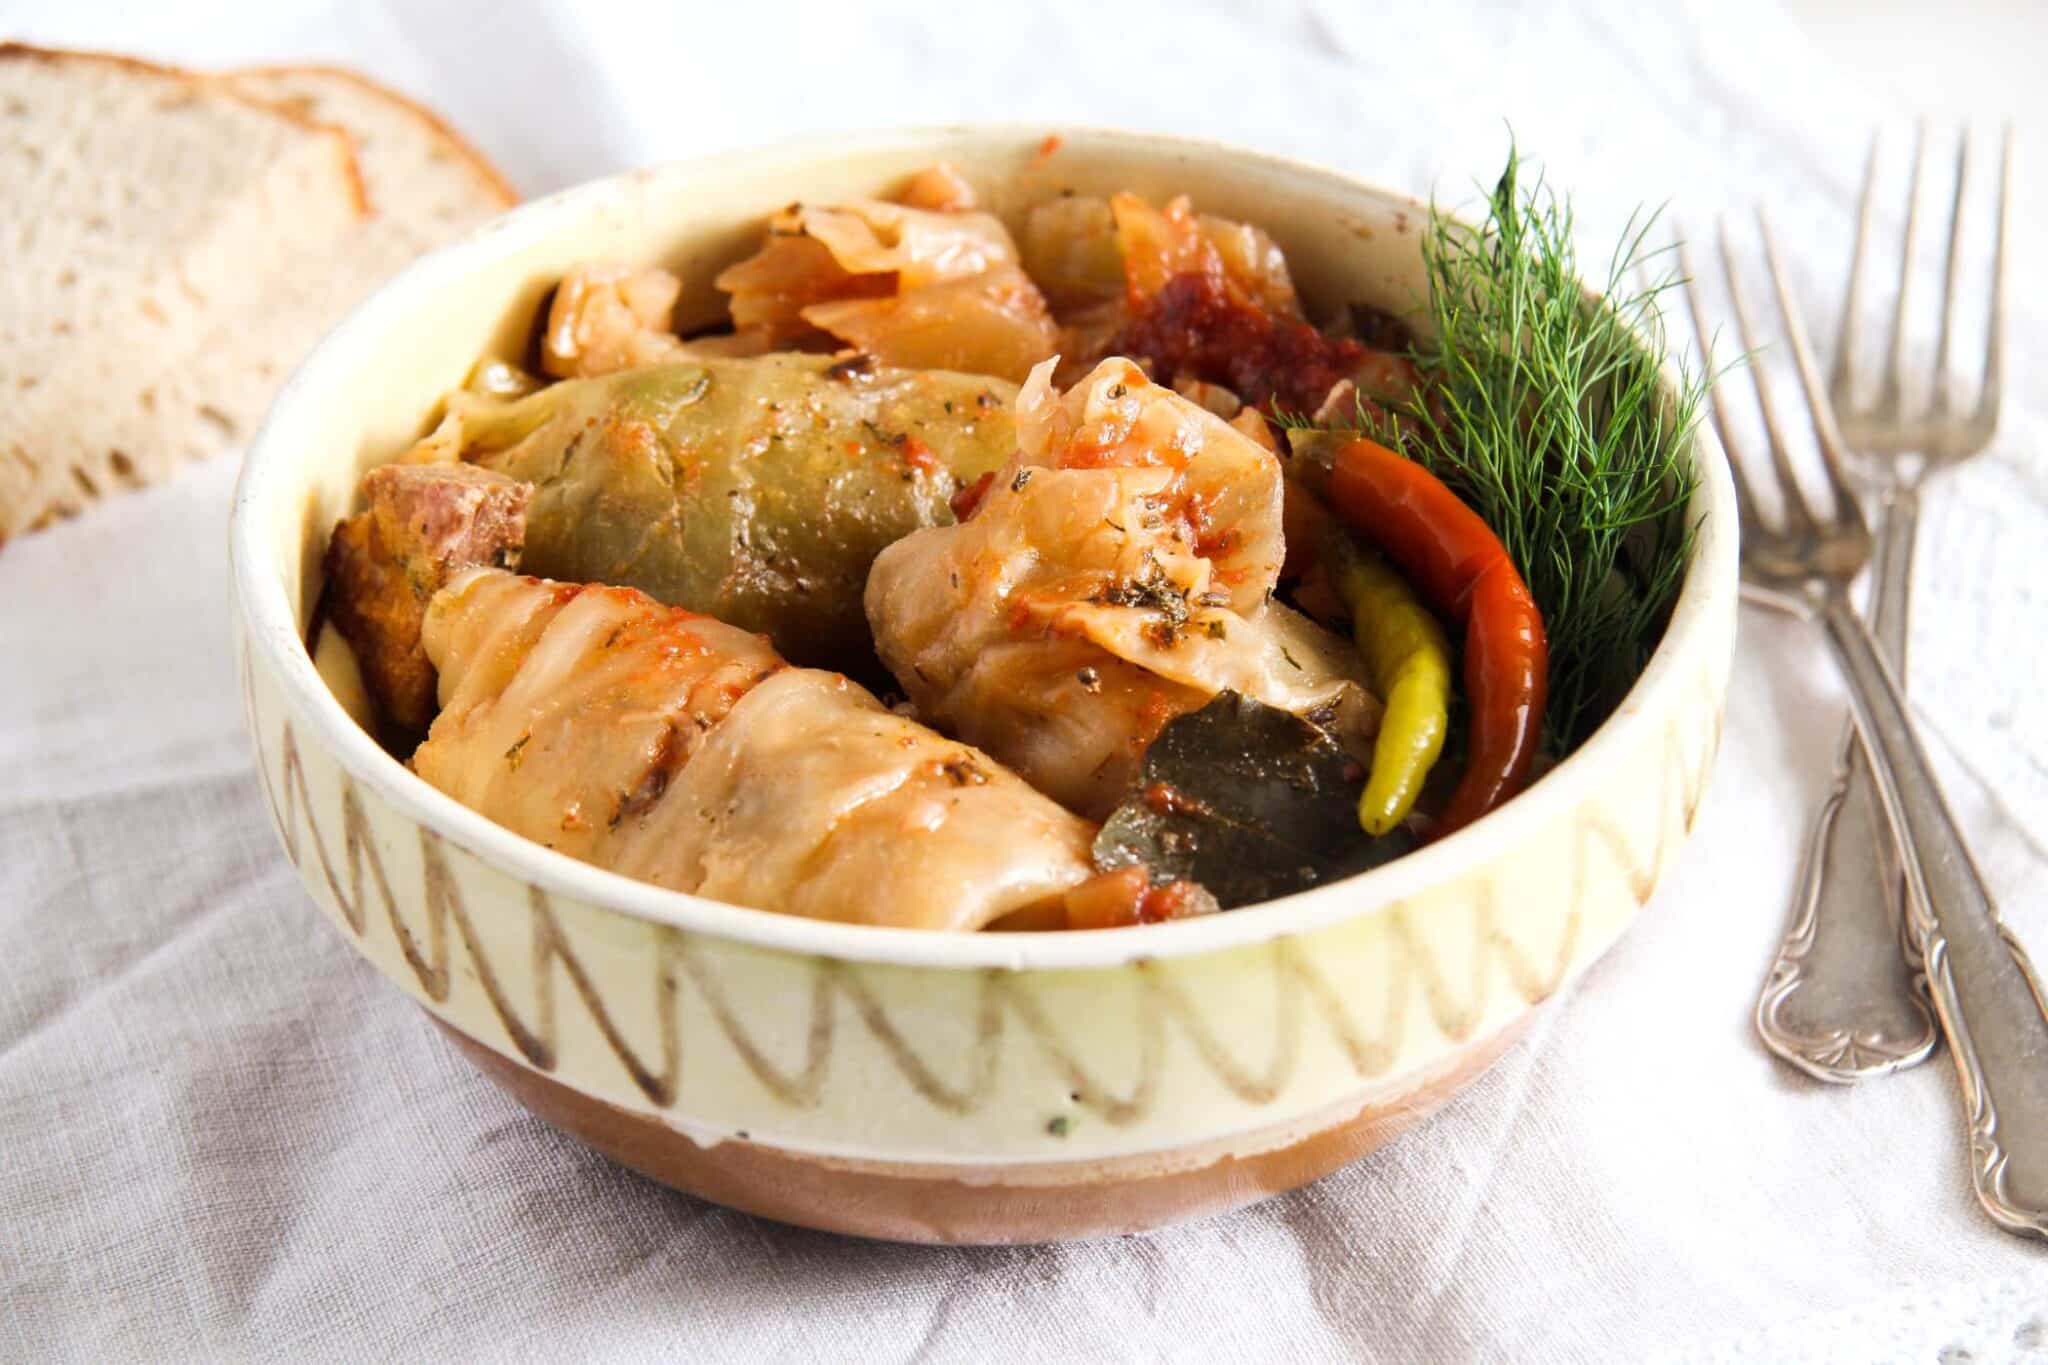 stuffed cabbage in a earthen dish.